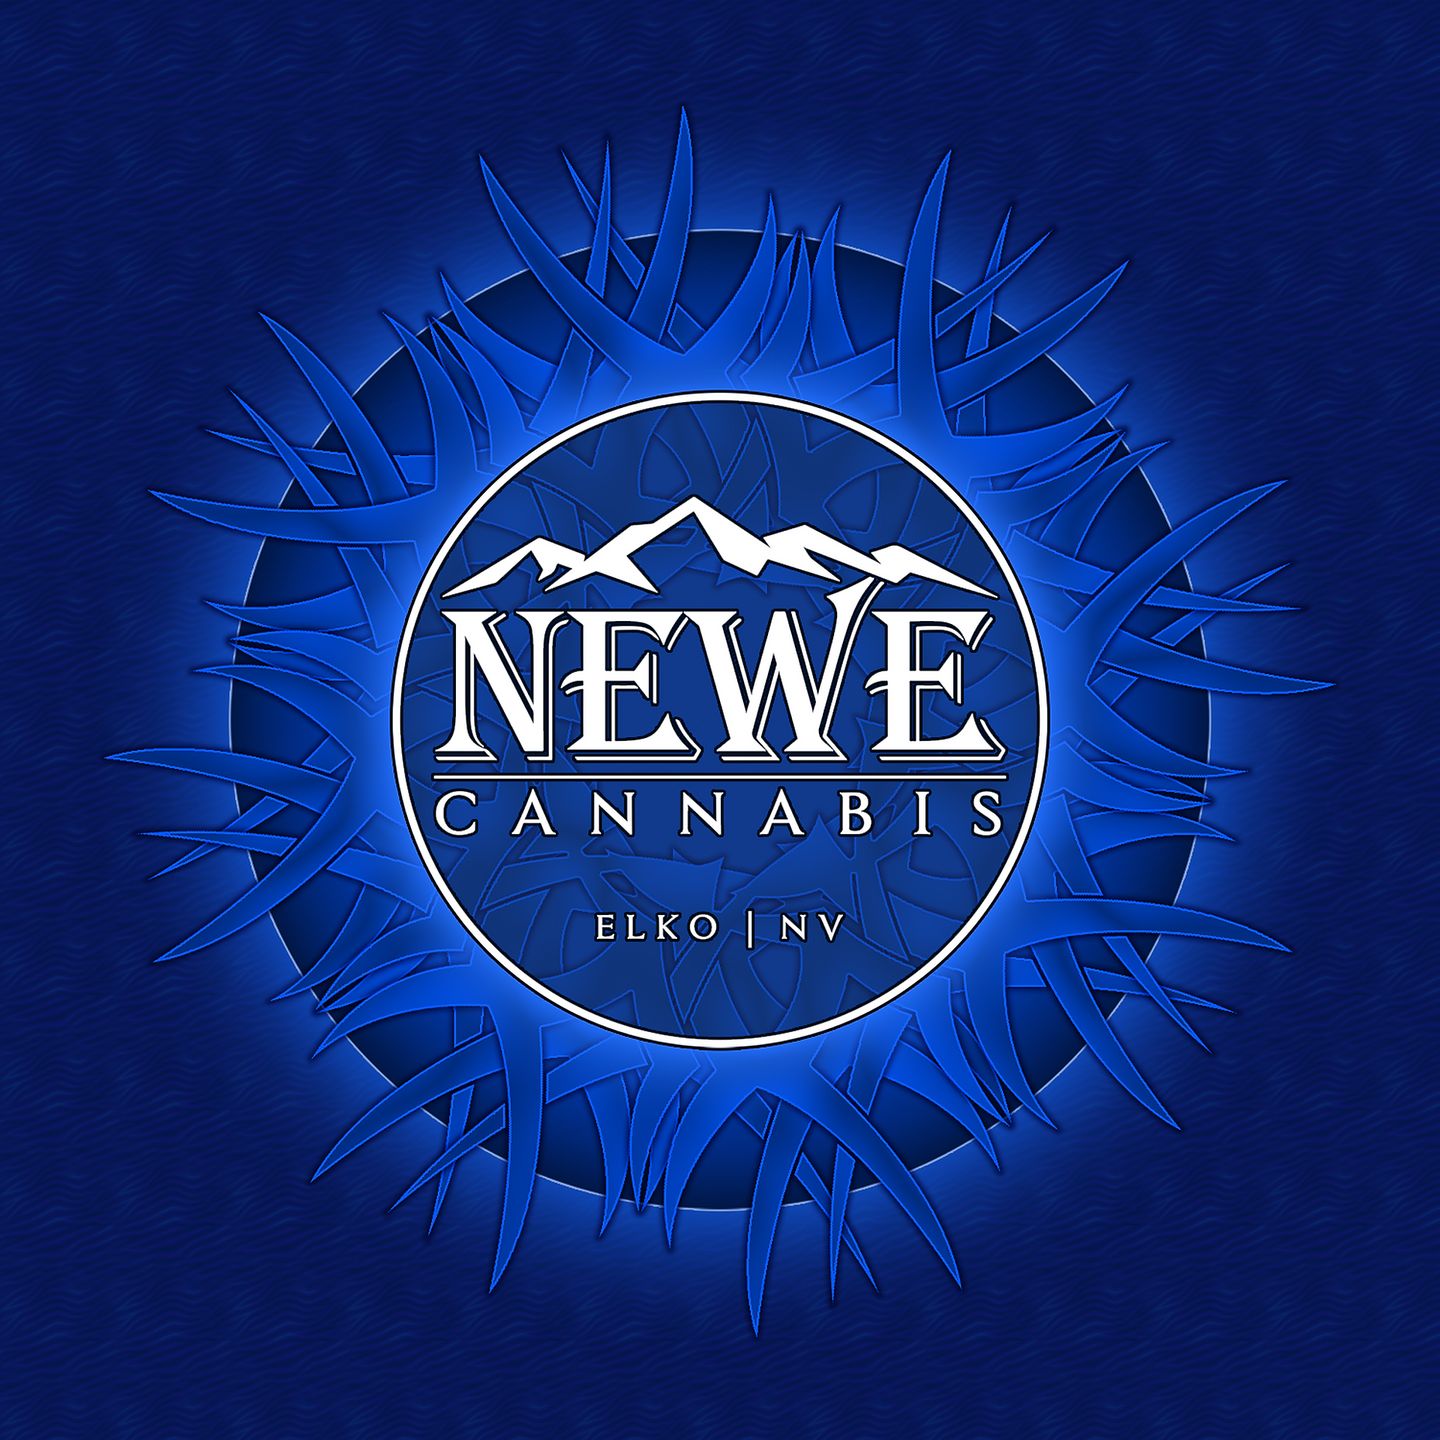 image feature Newe Cannabis